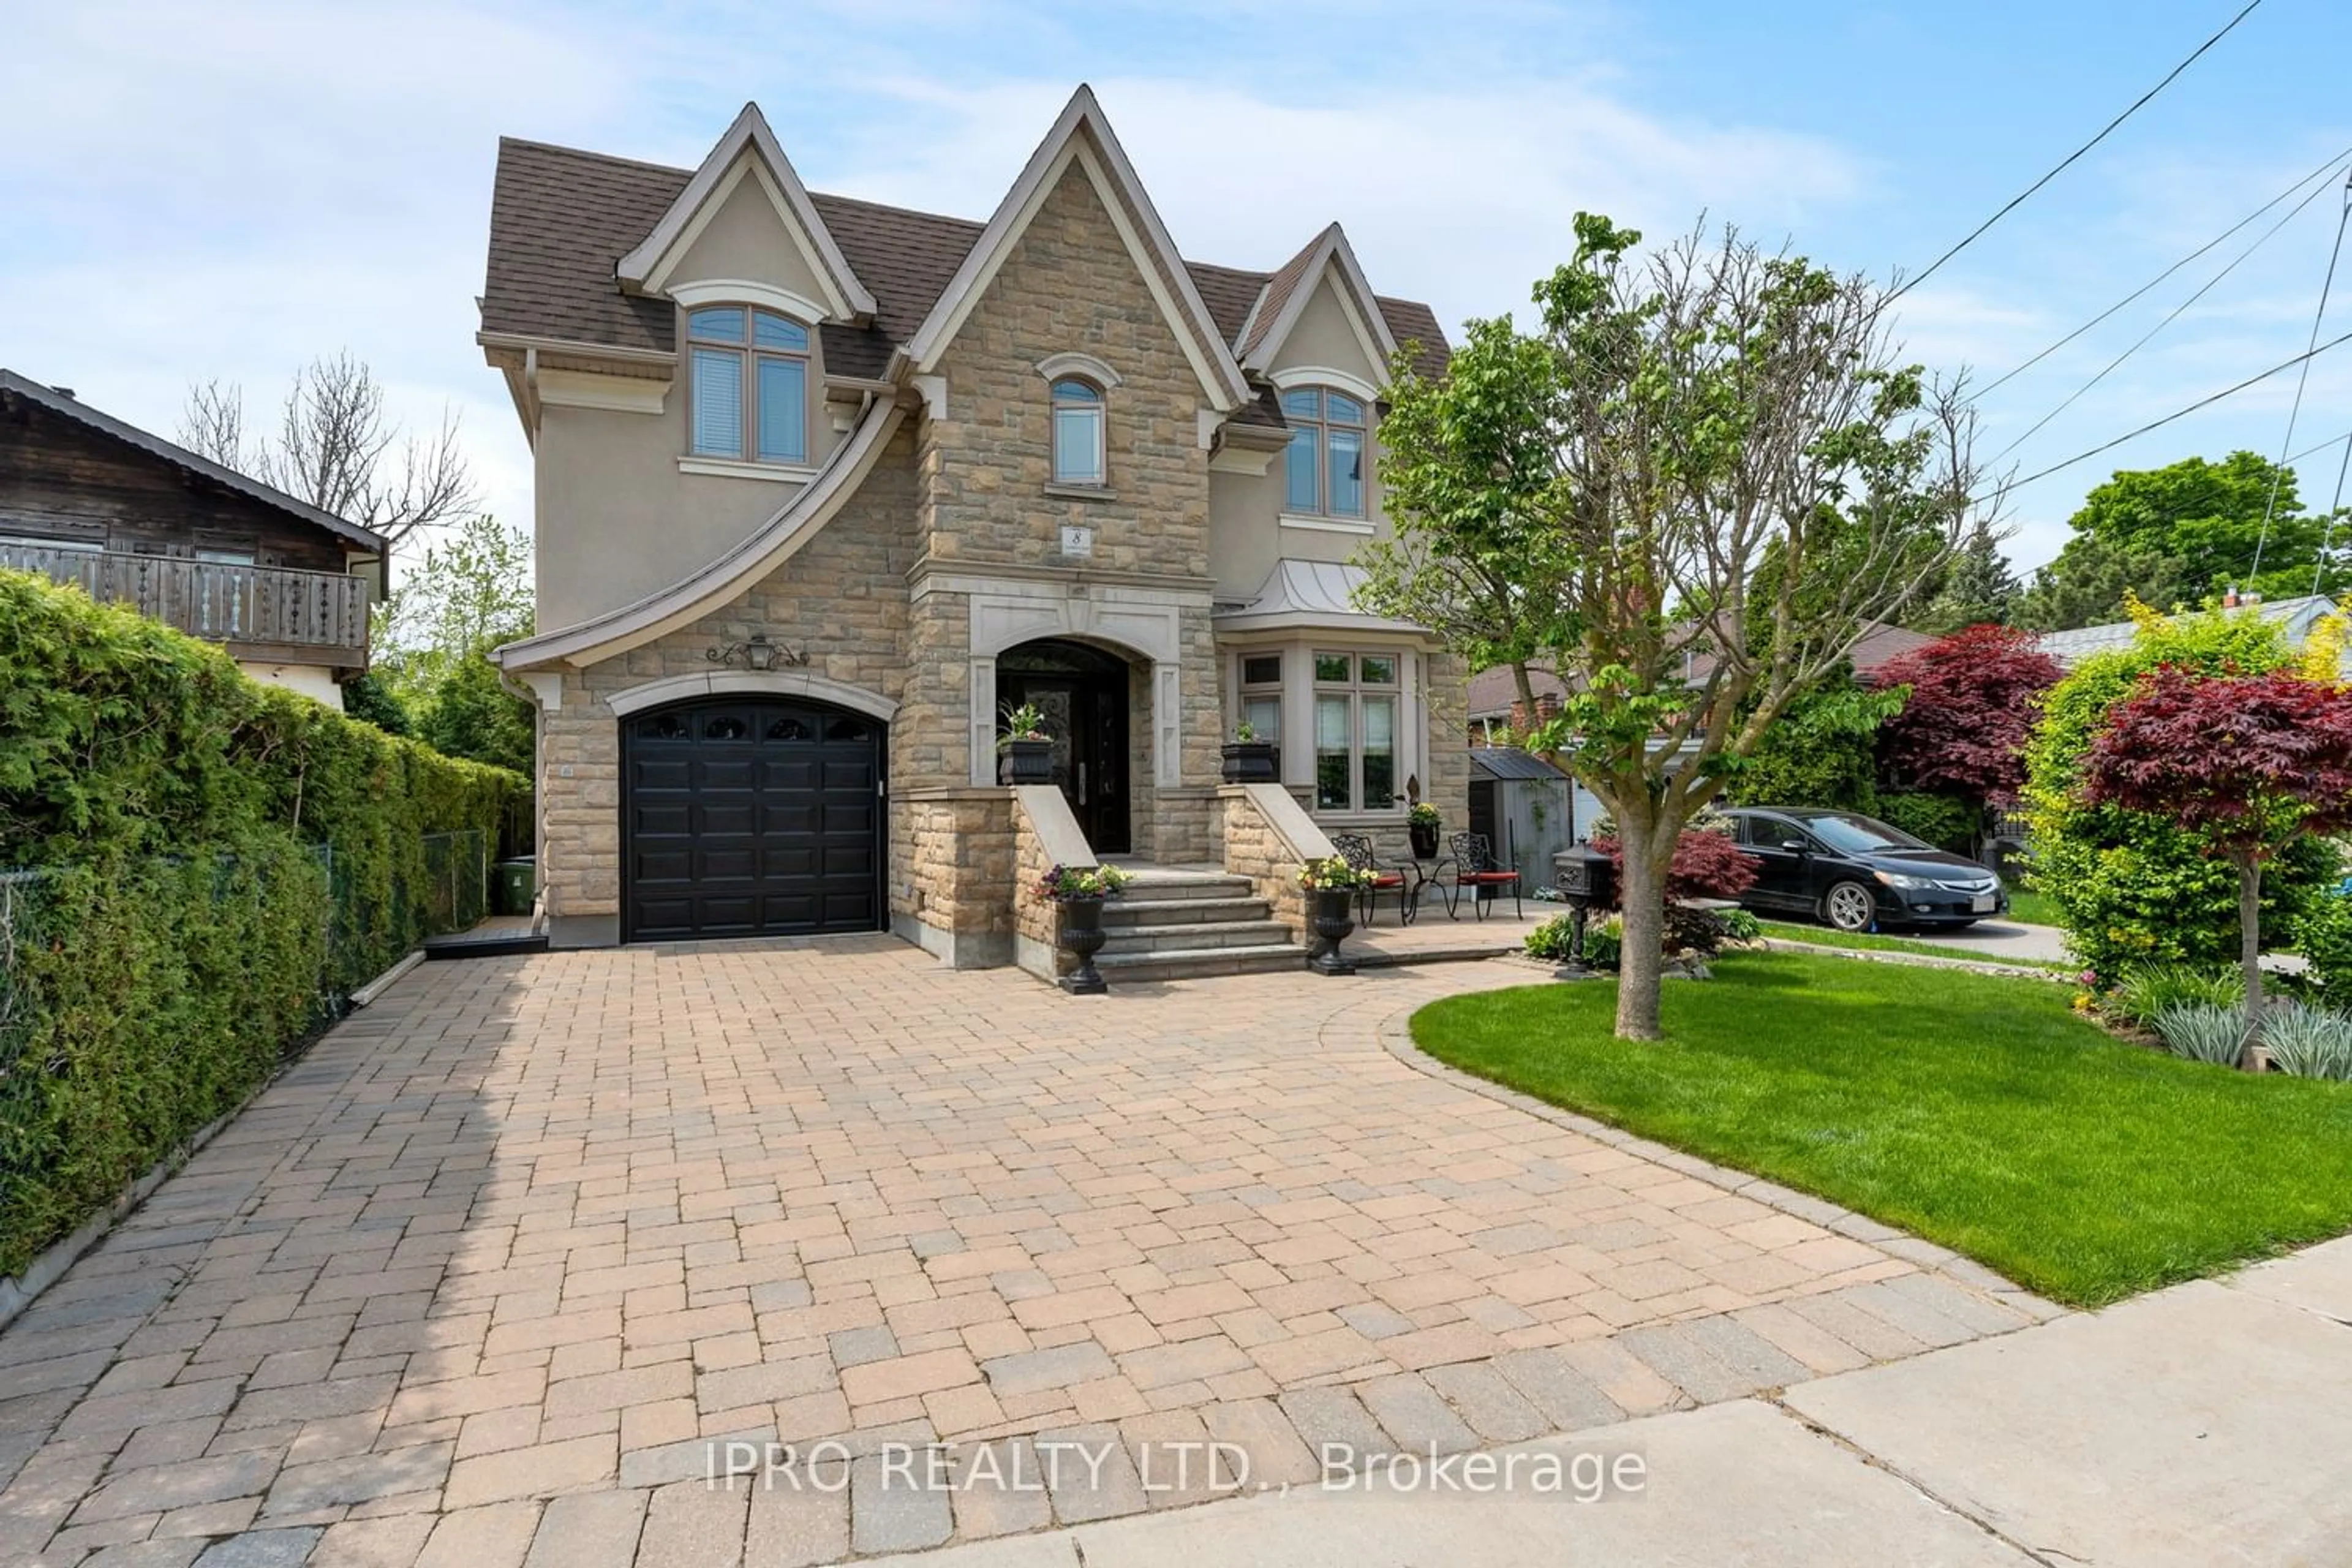 Home with brick exterior material for 8 Leander Crt, Toronto Ontario M4B 2W1